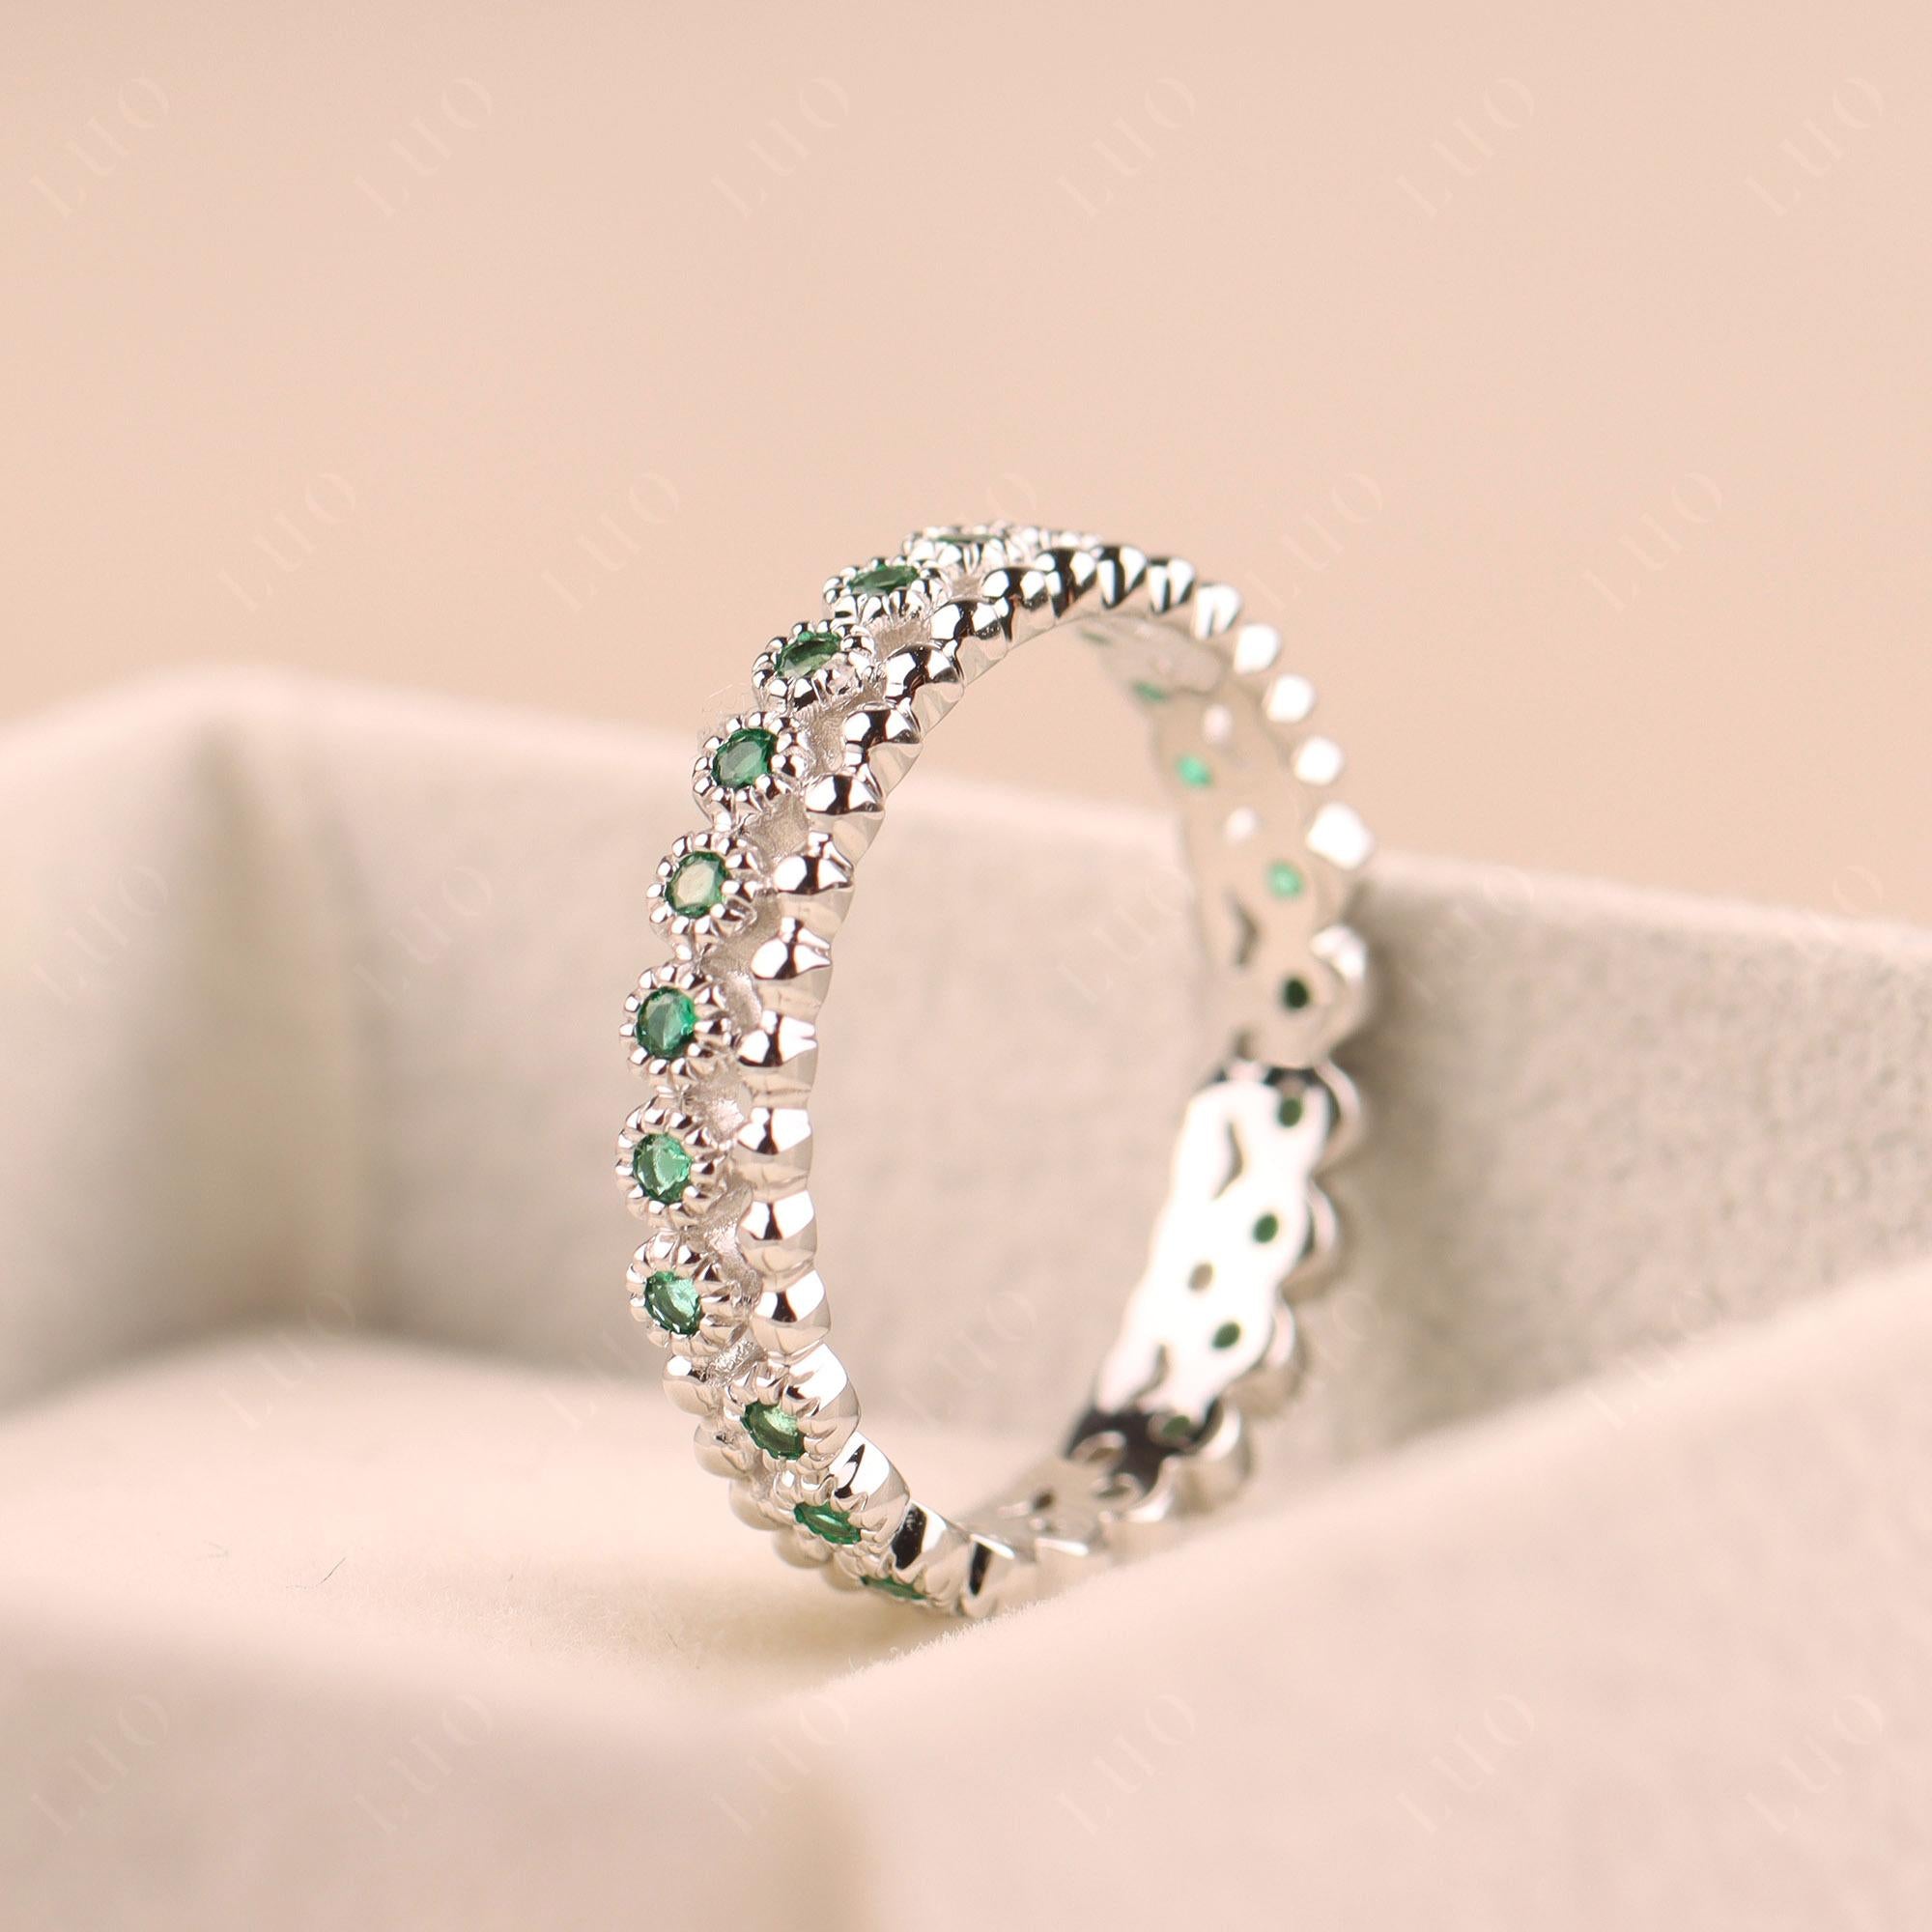 Vintage Inspired Lab Emerald Eternity Ring - LUO Jewelry